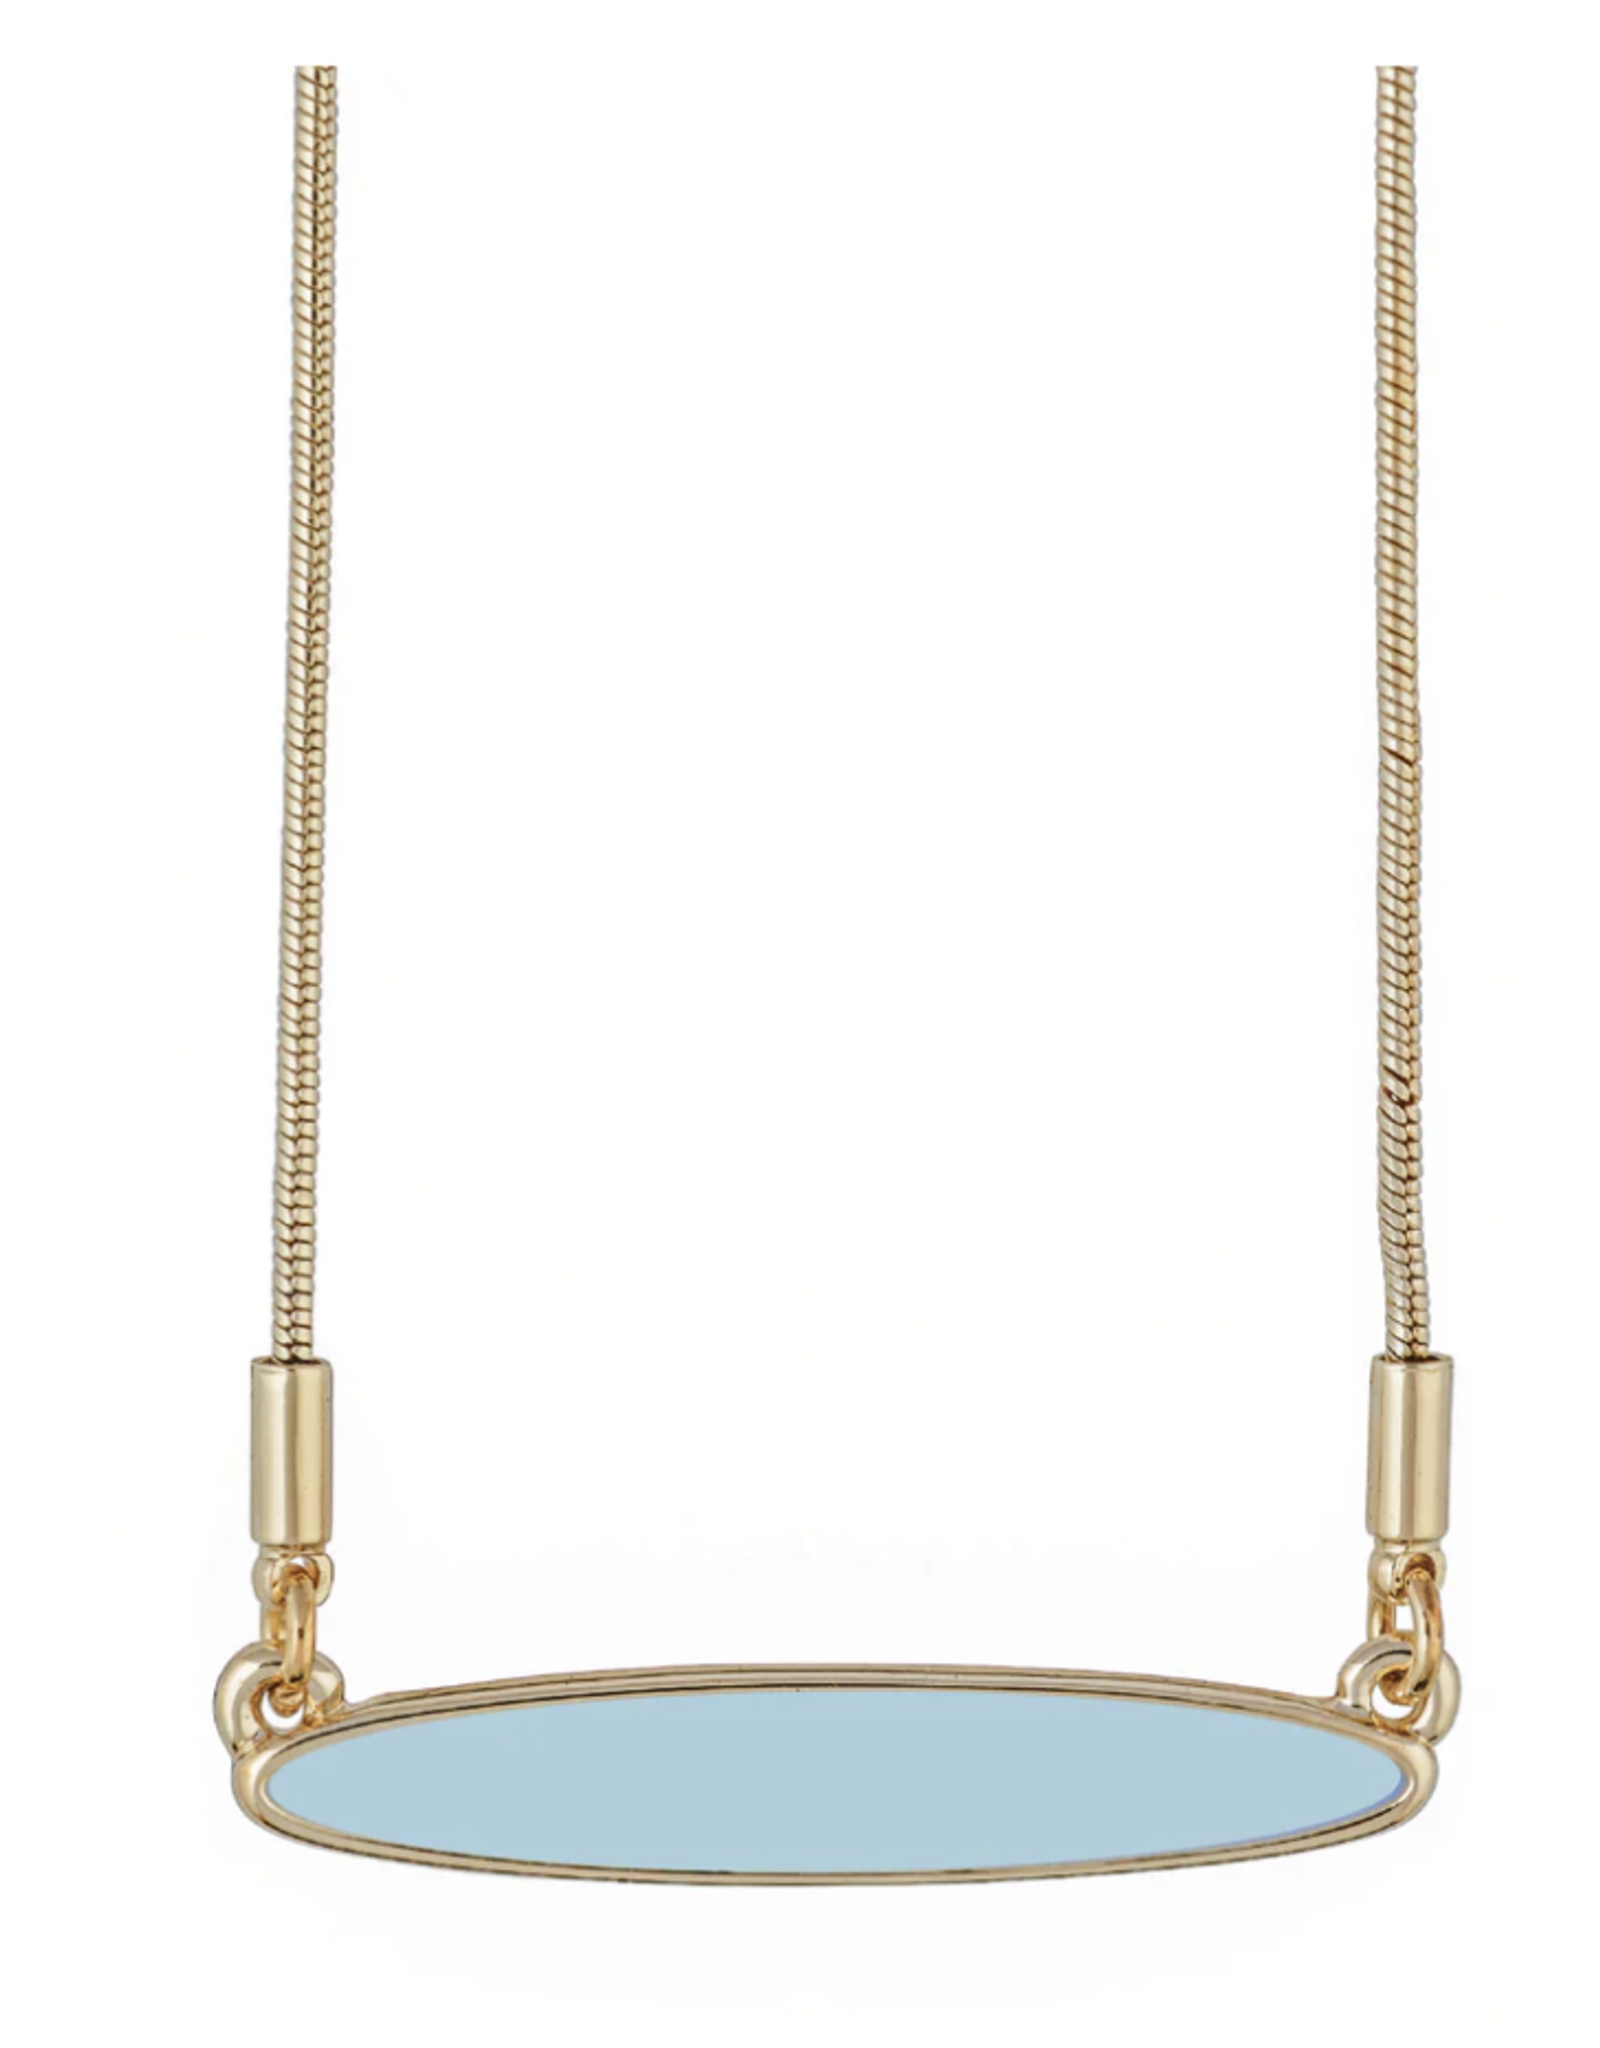 The Beach and Back Lavallette Long Board Necklace Aqua